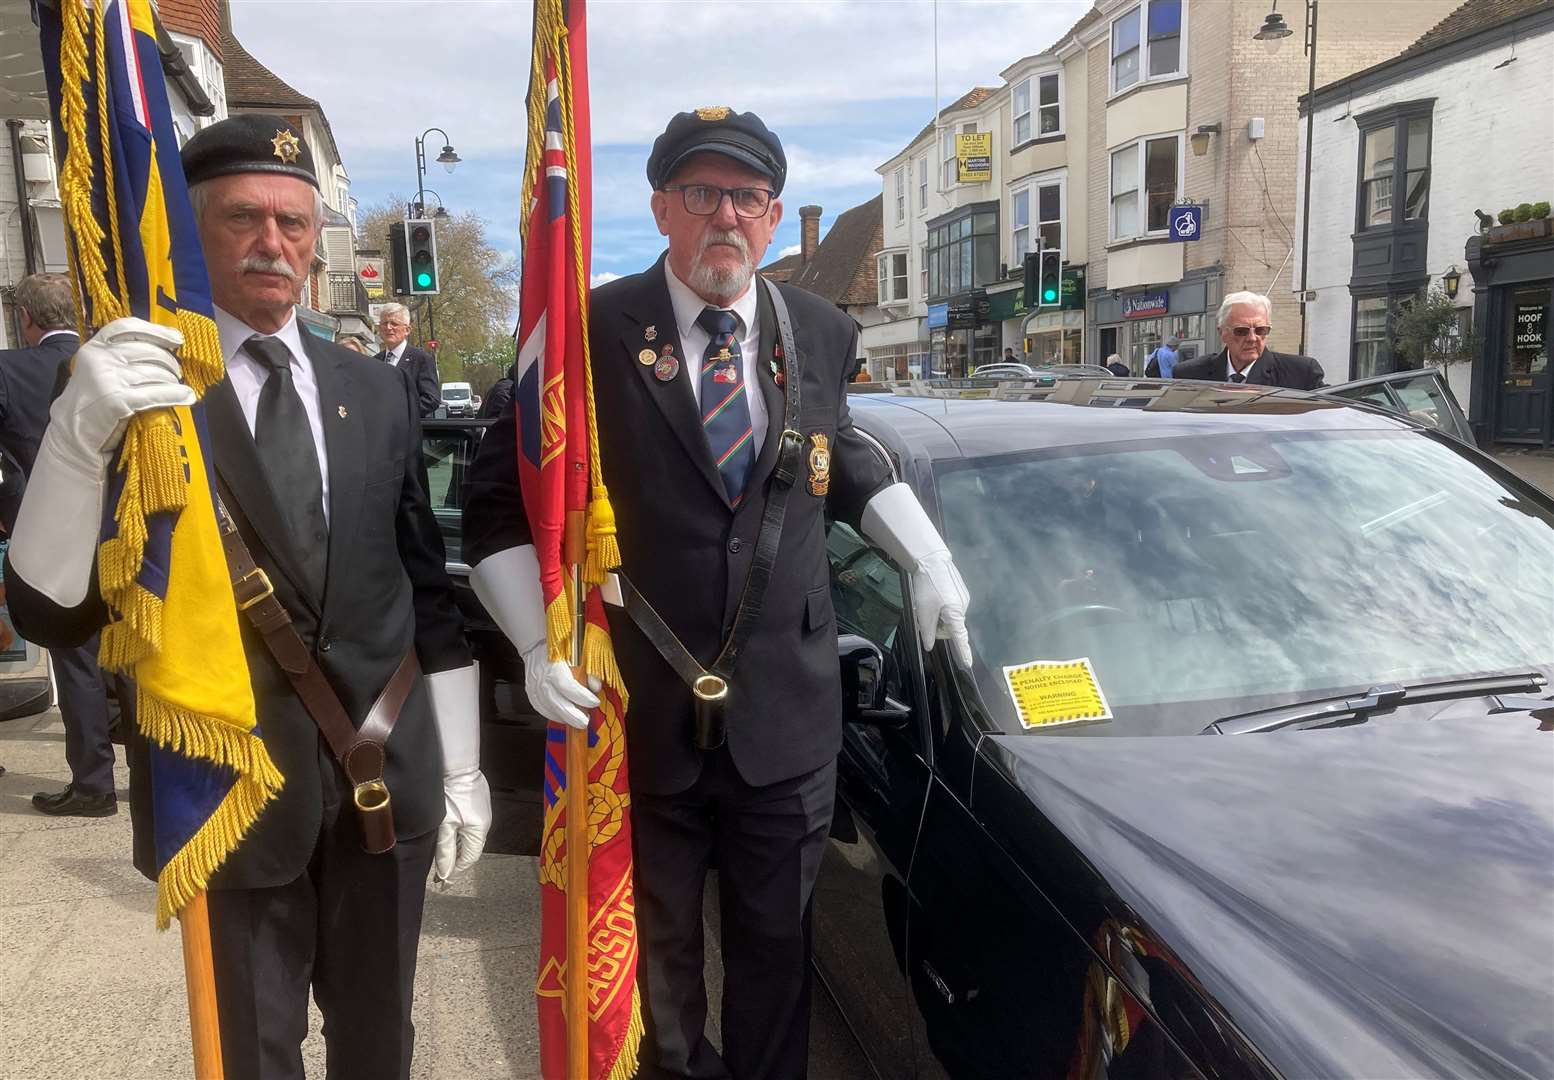 Representatives of the British Legion by the funeral limo with the parking ticket in Tenterden High Street. Picture: Lindsay Hammond